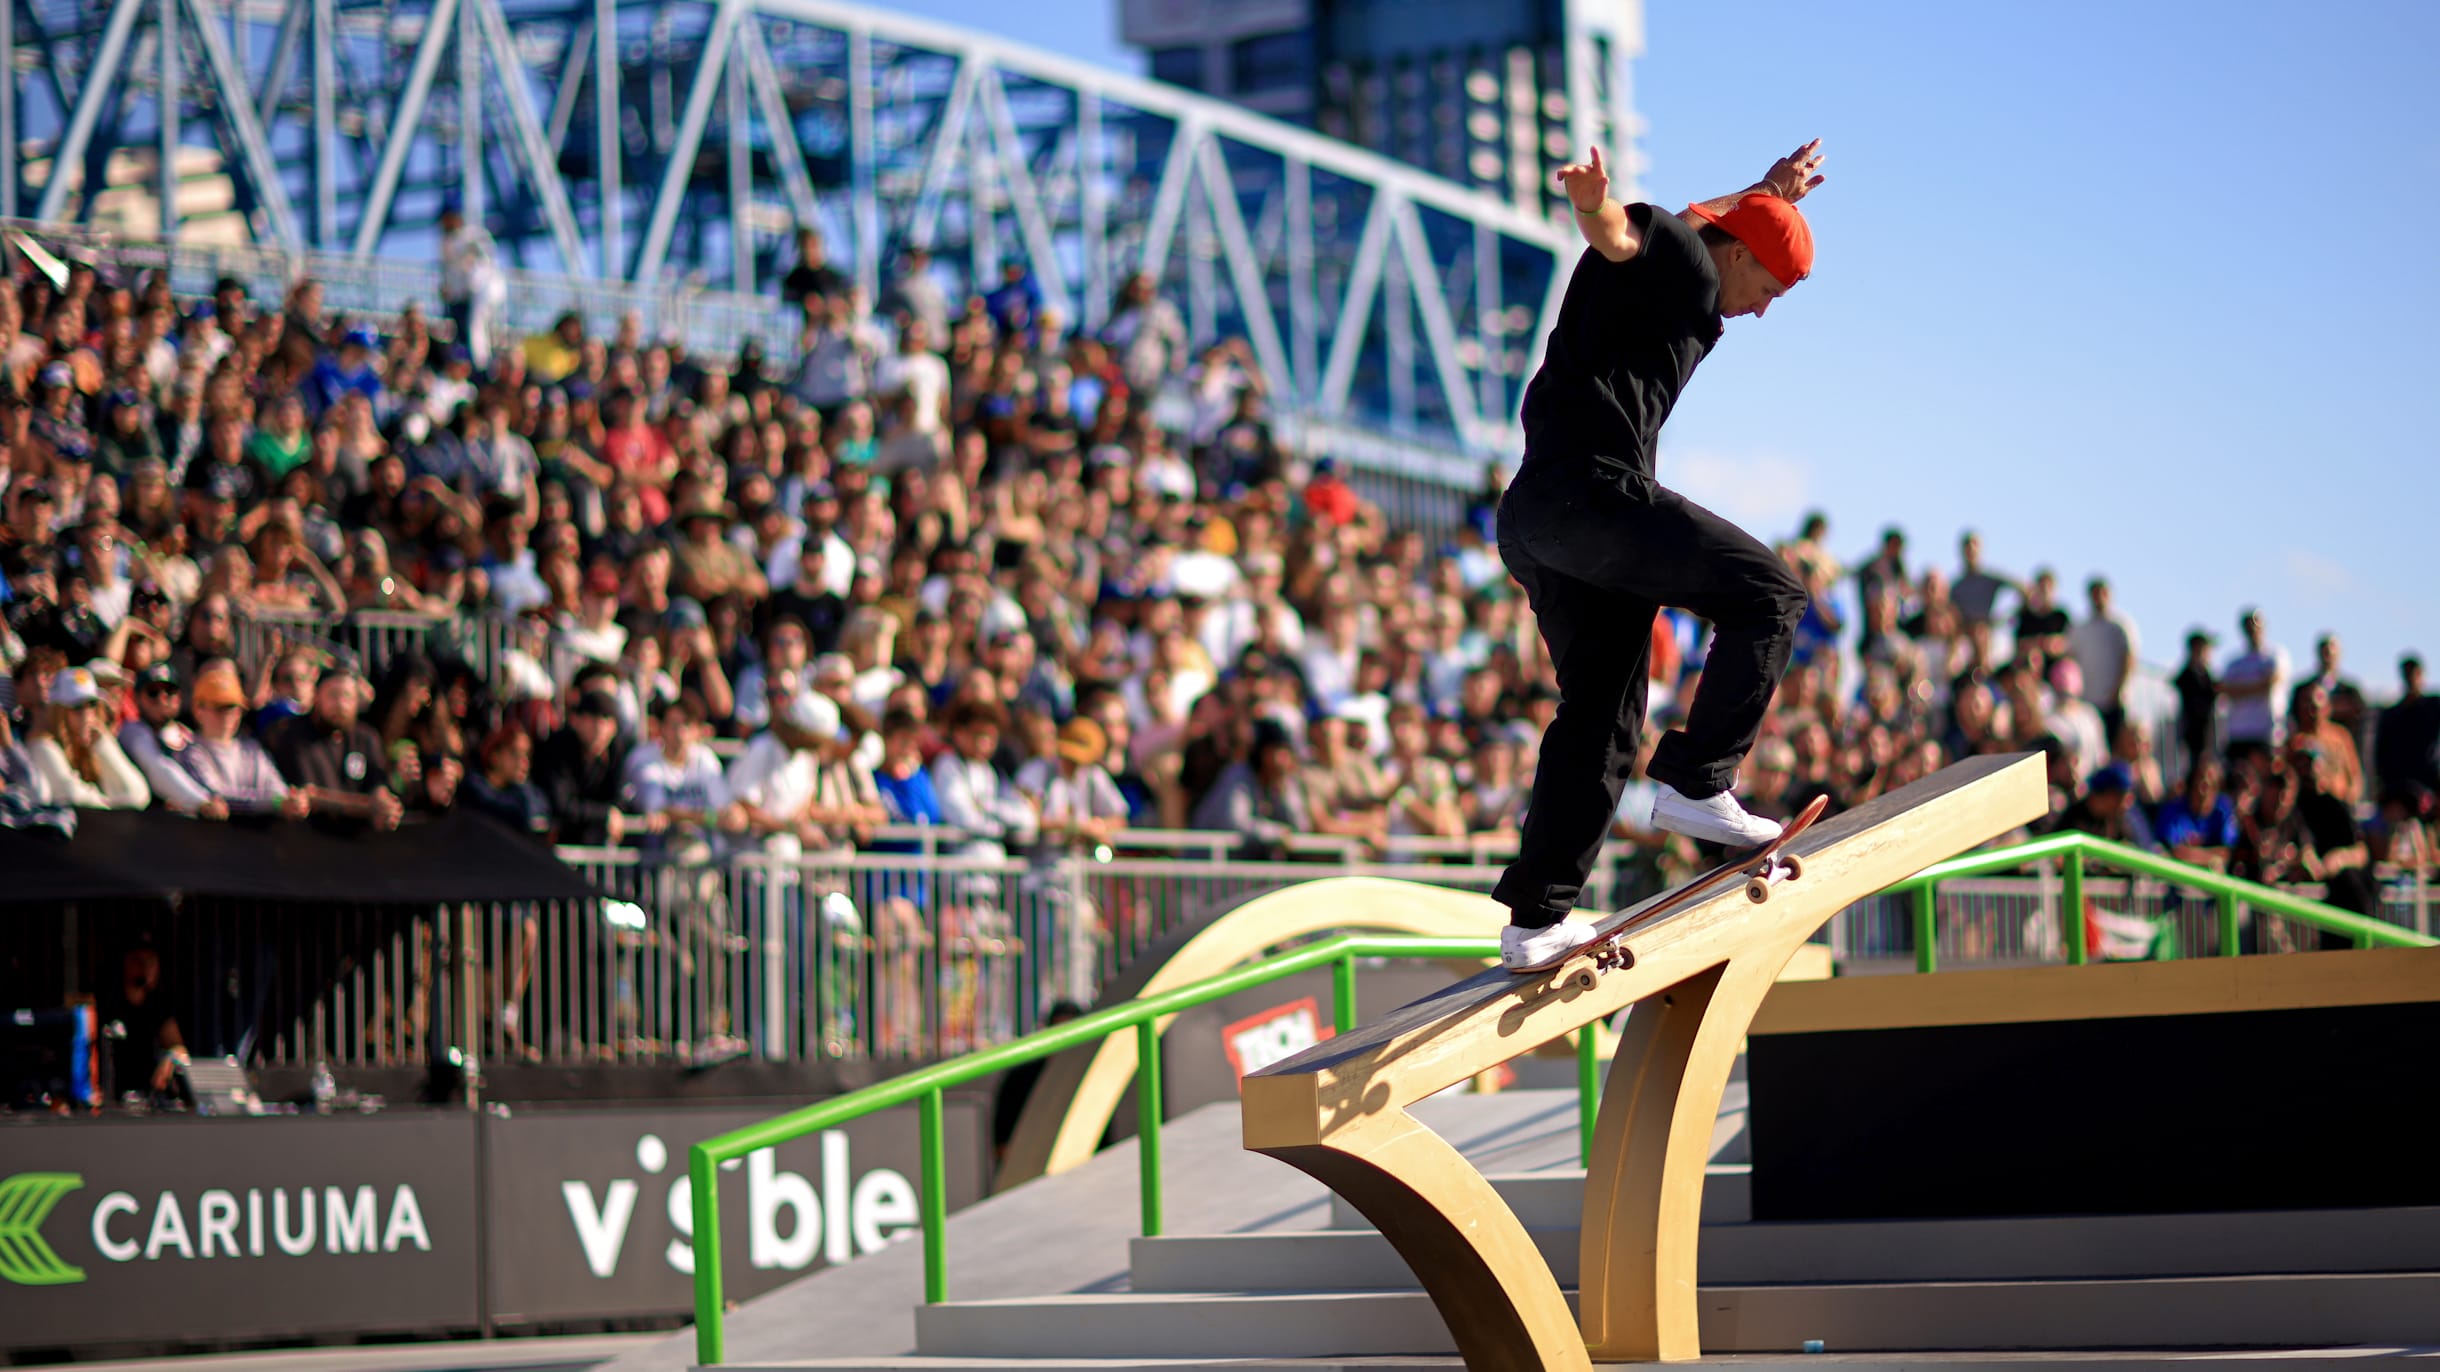 Two 13-year-old skaters win at X Games